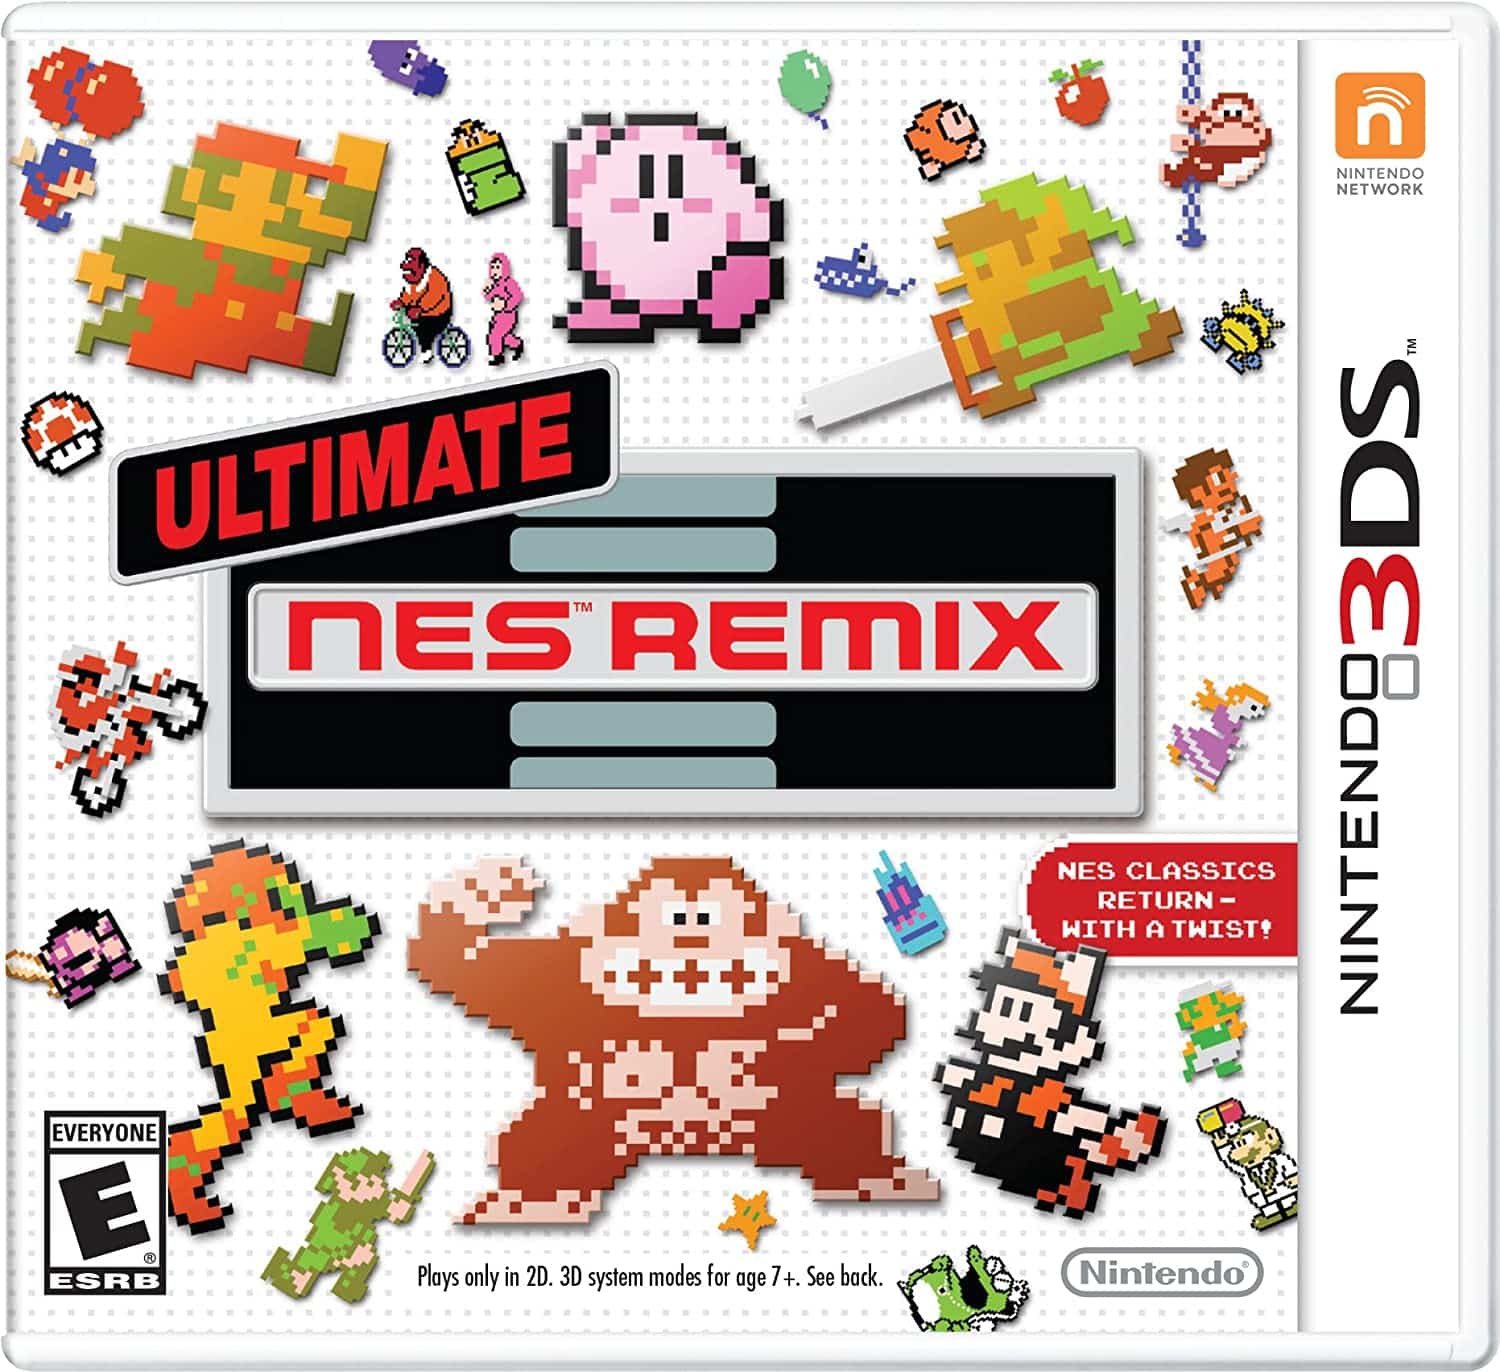 Ultimate NES Remix player count stats